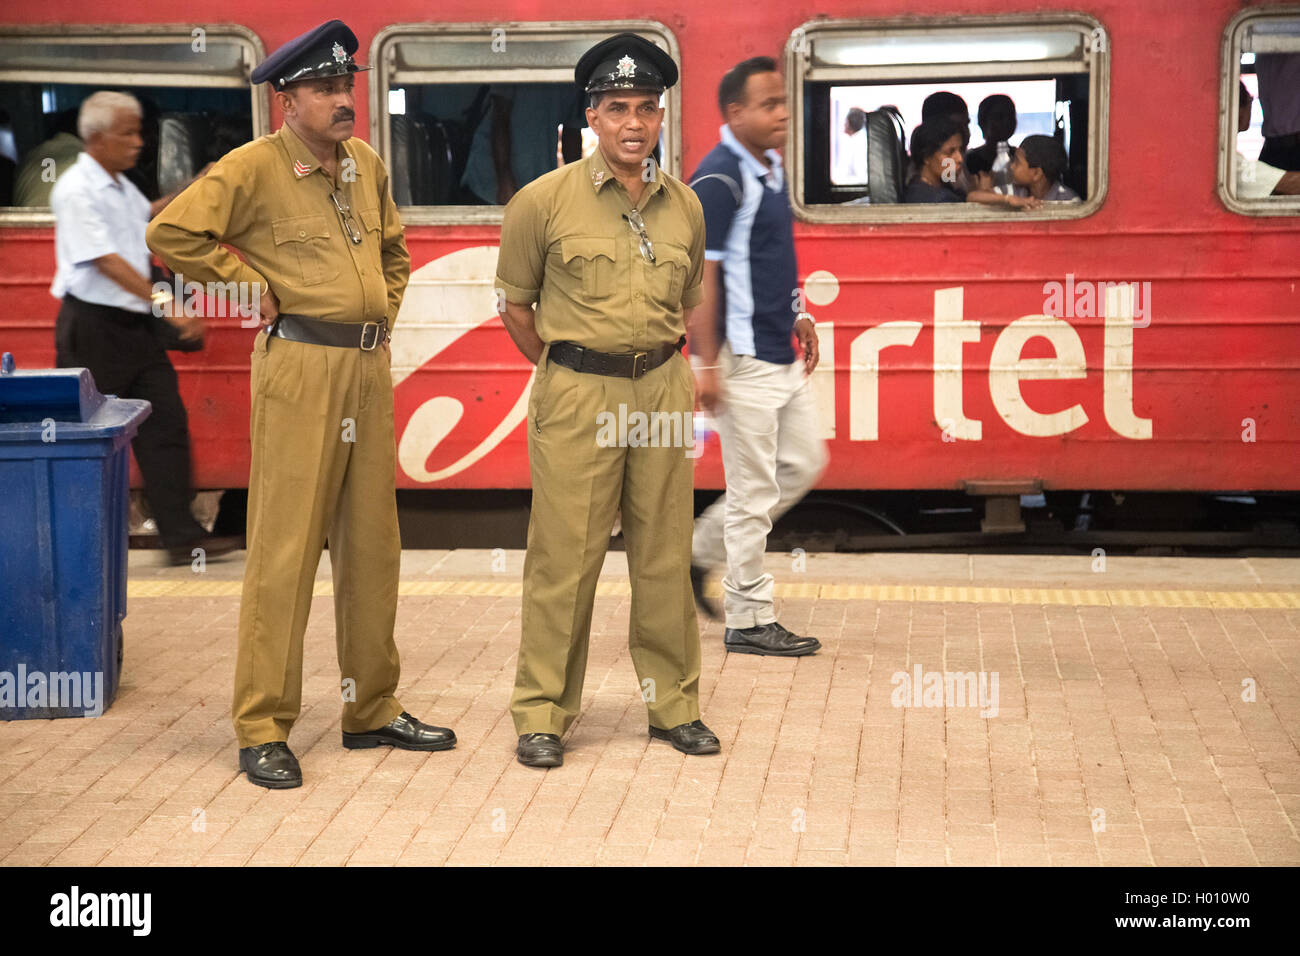 COLOMBO, SRI LANKA - MARCH 12, 2014: Two policemen standing at the train station. The police force has a manpower of approximate Stock Photo